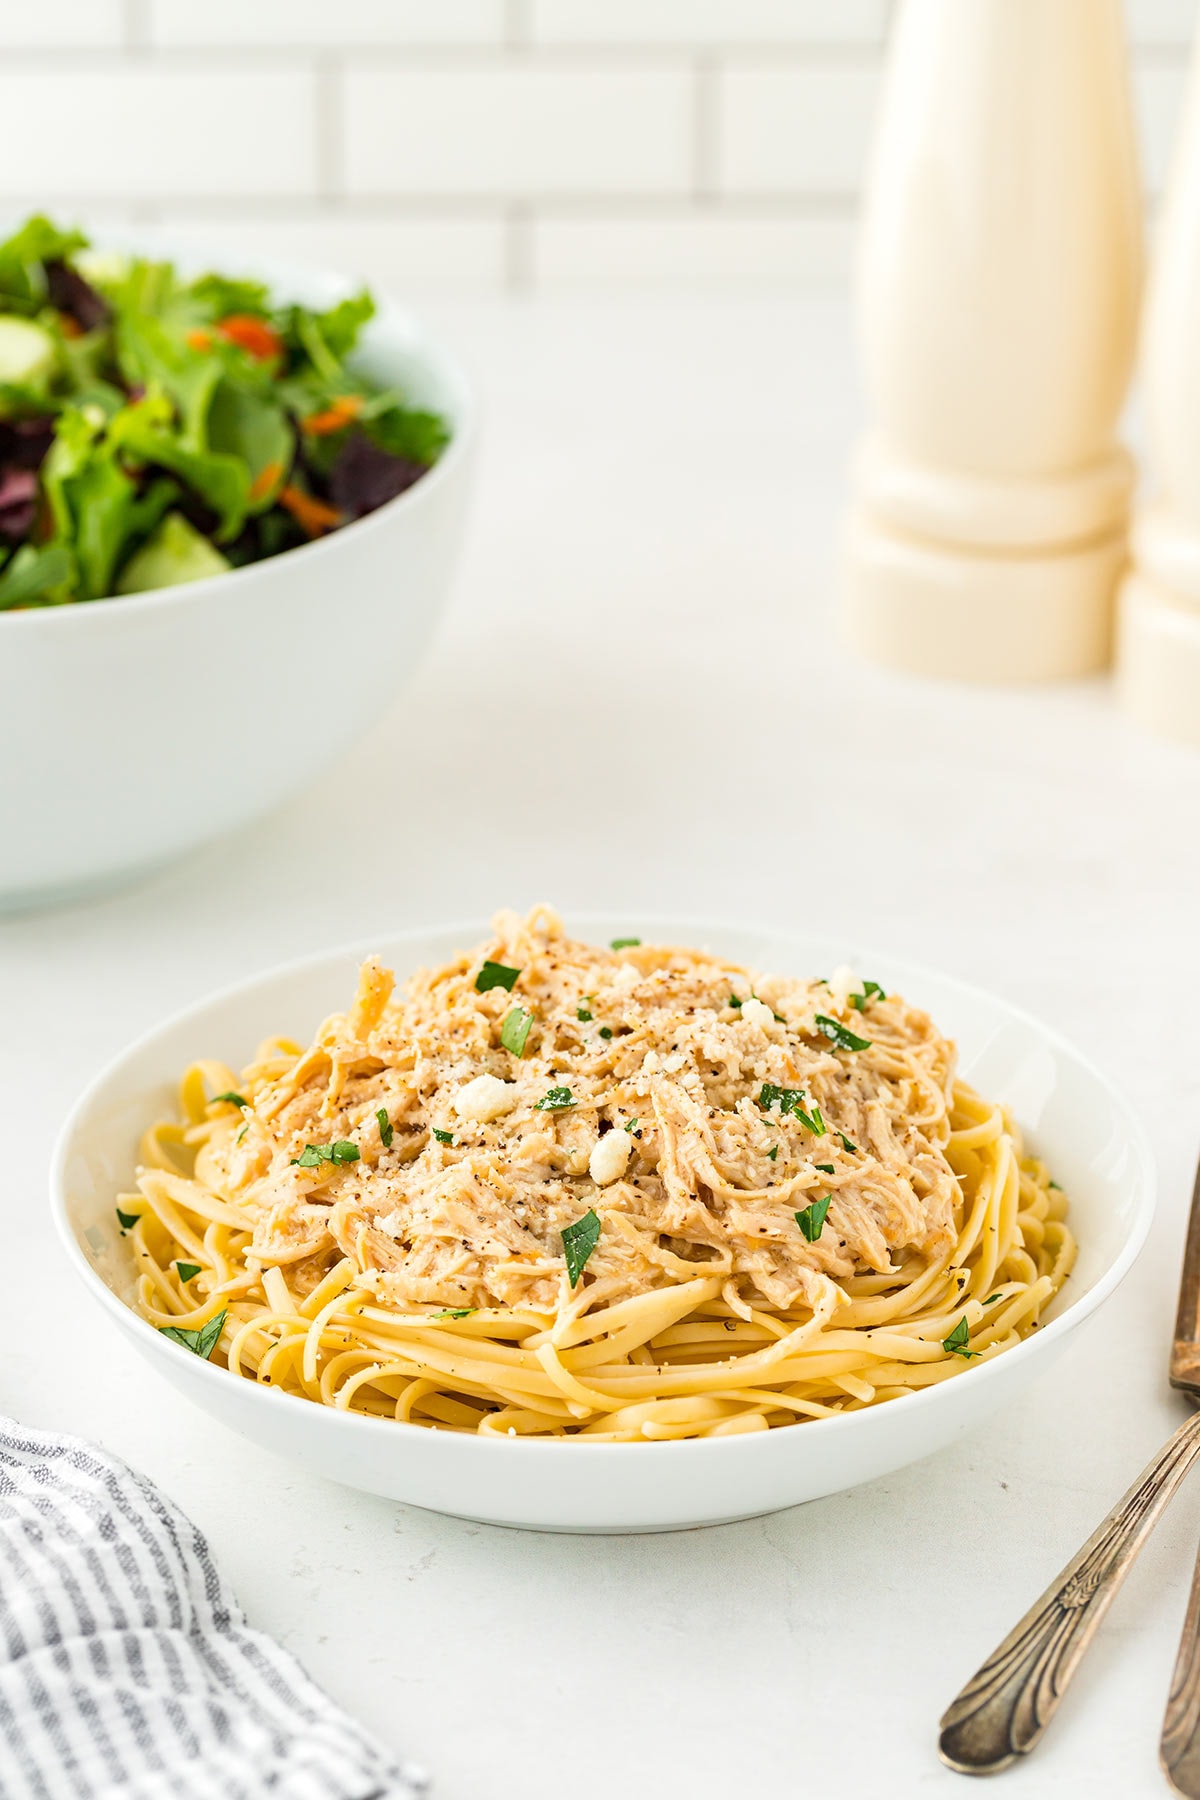 Creamy Caesar Chicken layered over cooked linguini noodles in a white dish with green parsley garnish.